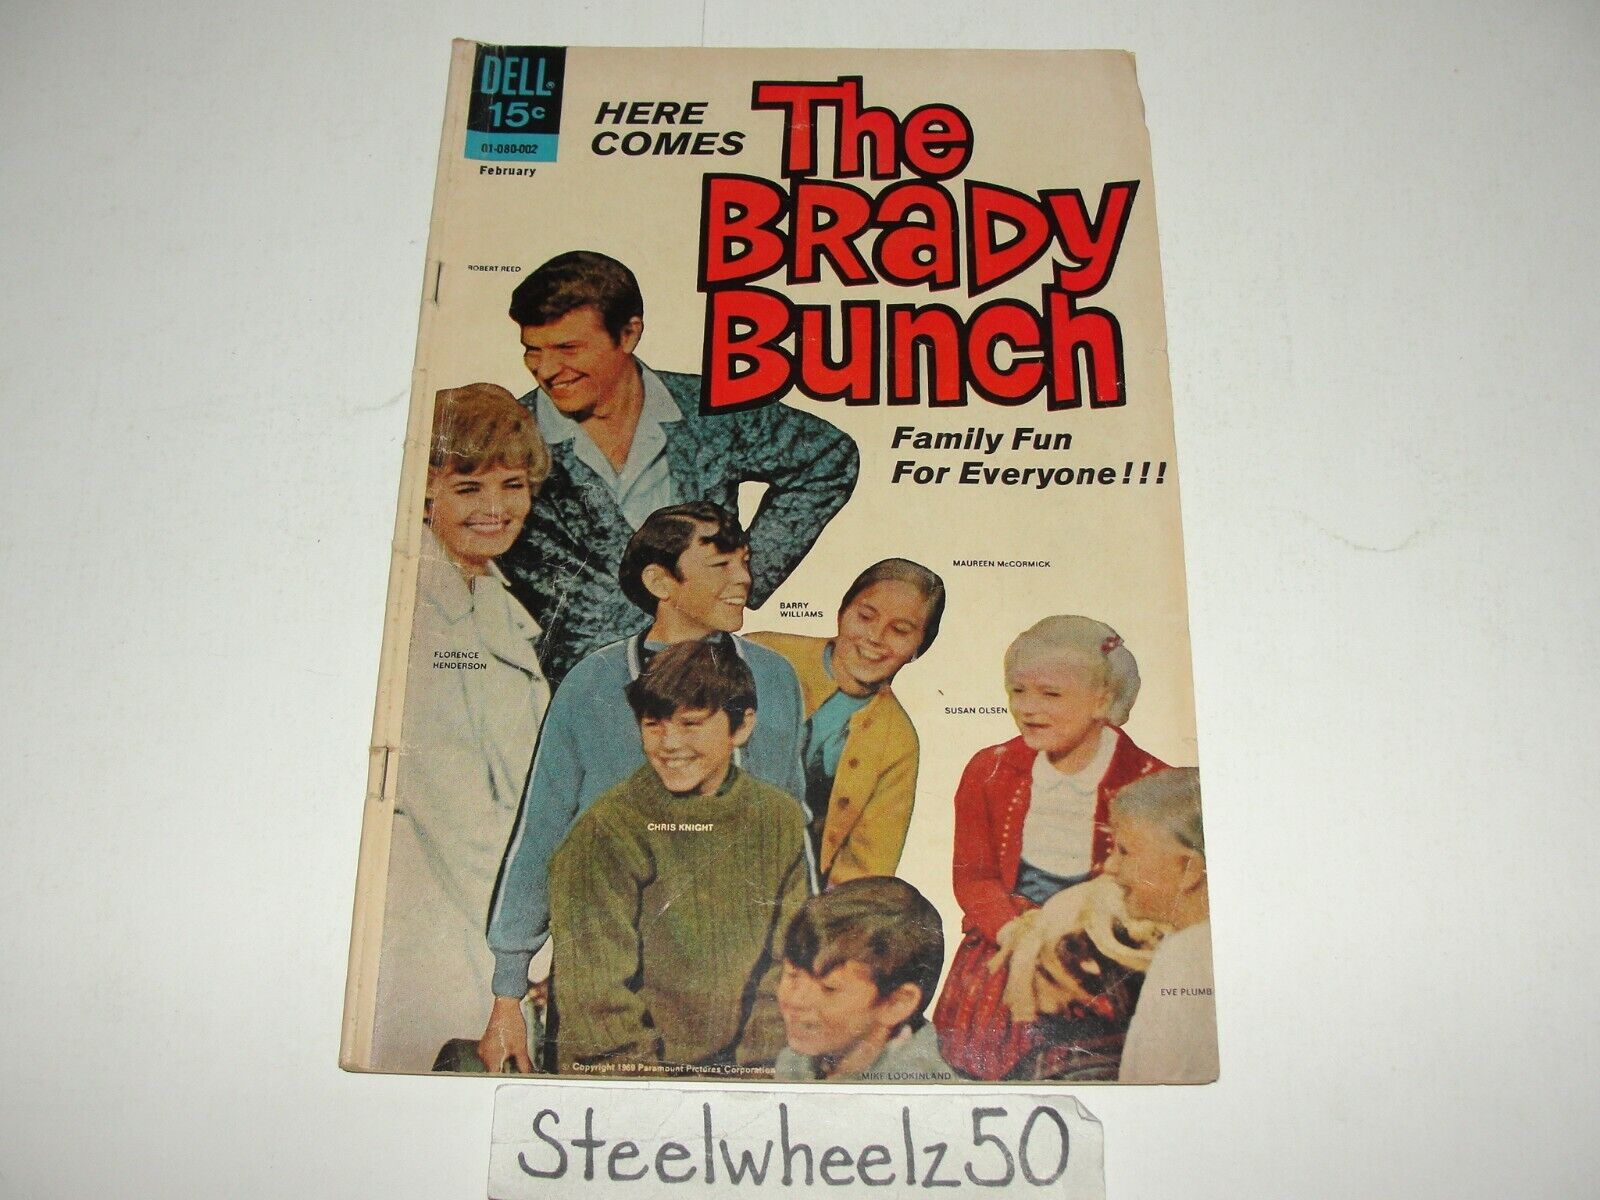 The Brady Bunch #1 Comic Dell 1970 TV Photo Cover Greg Marcia Jan Peter Cindy